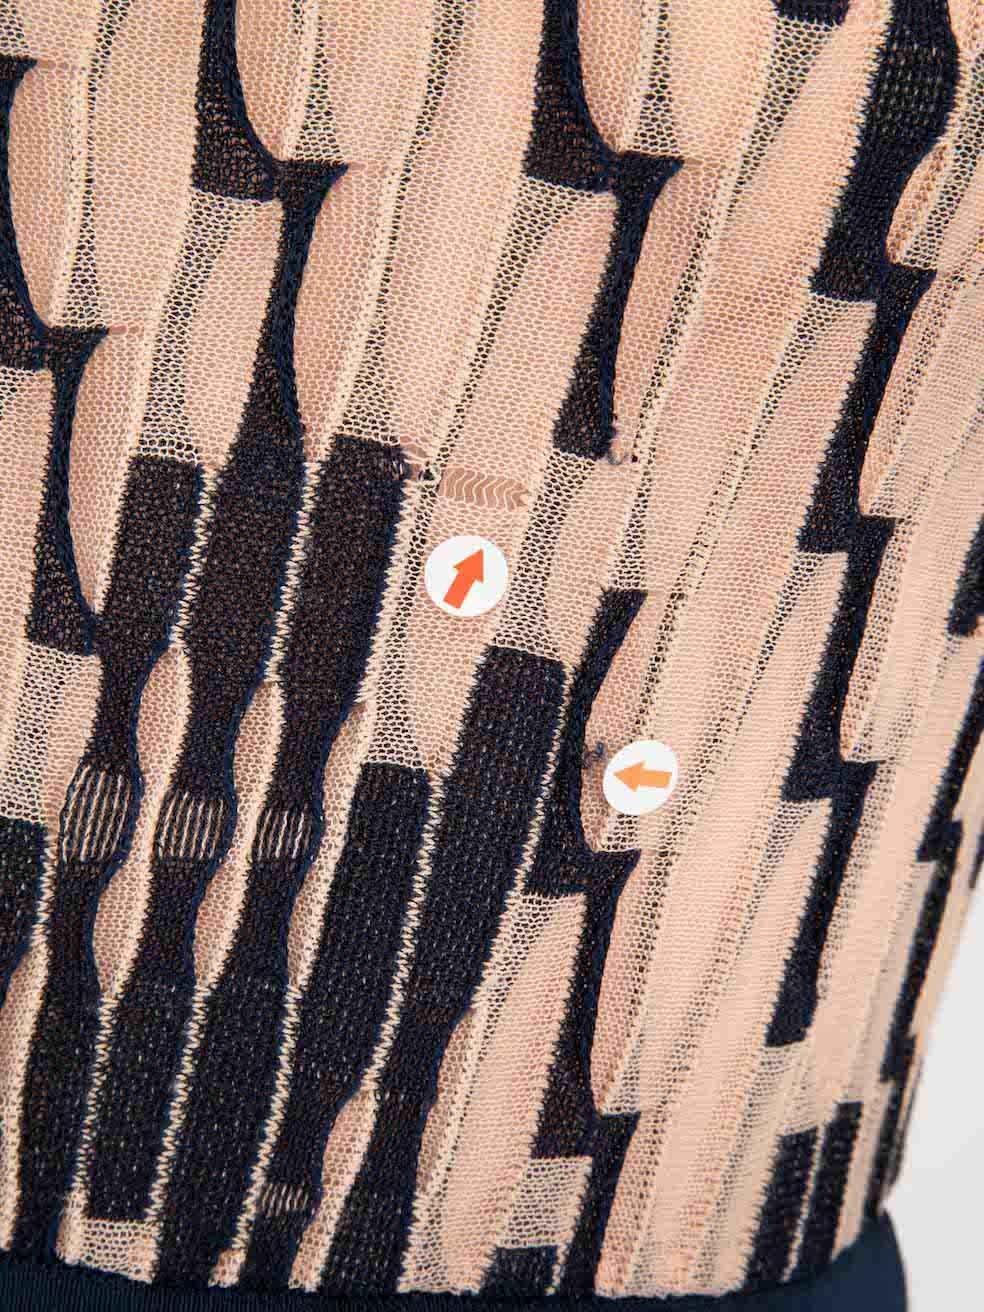 Missoni M Missoni Pink Abstract Knit Knee Length Dress Size S For Sale 1